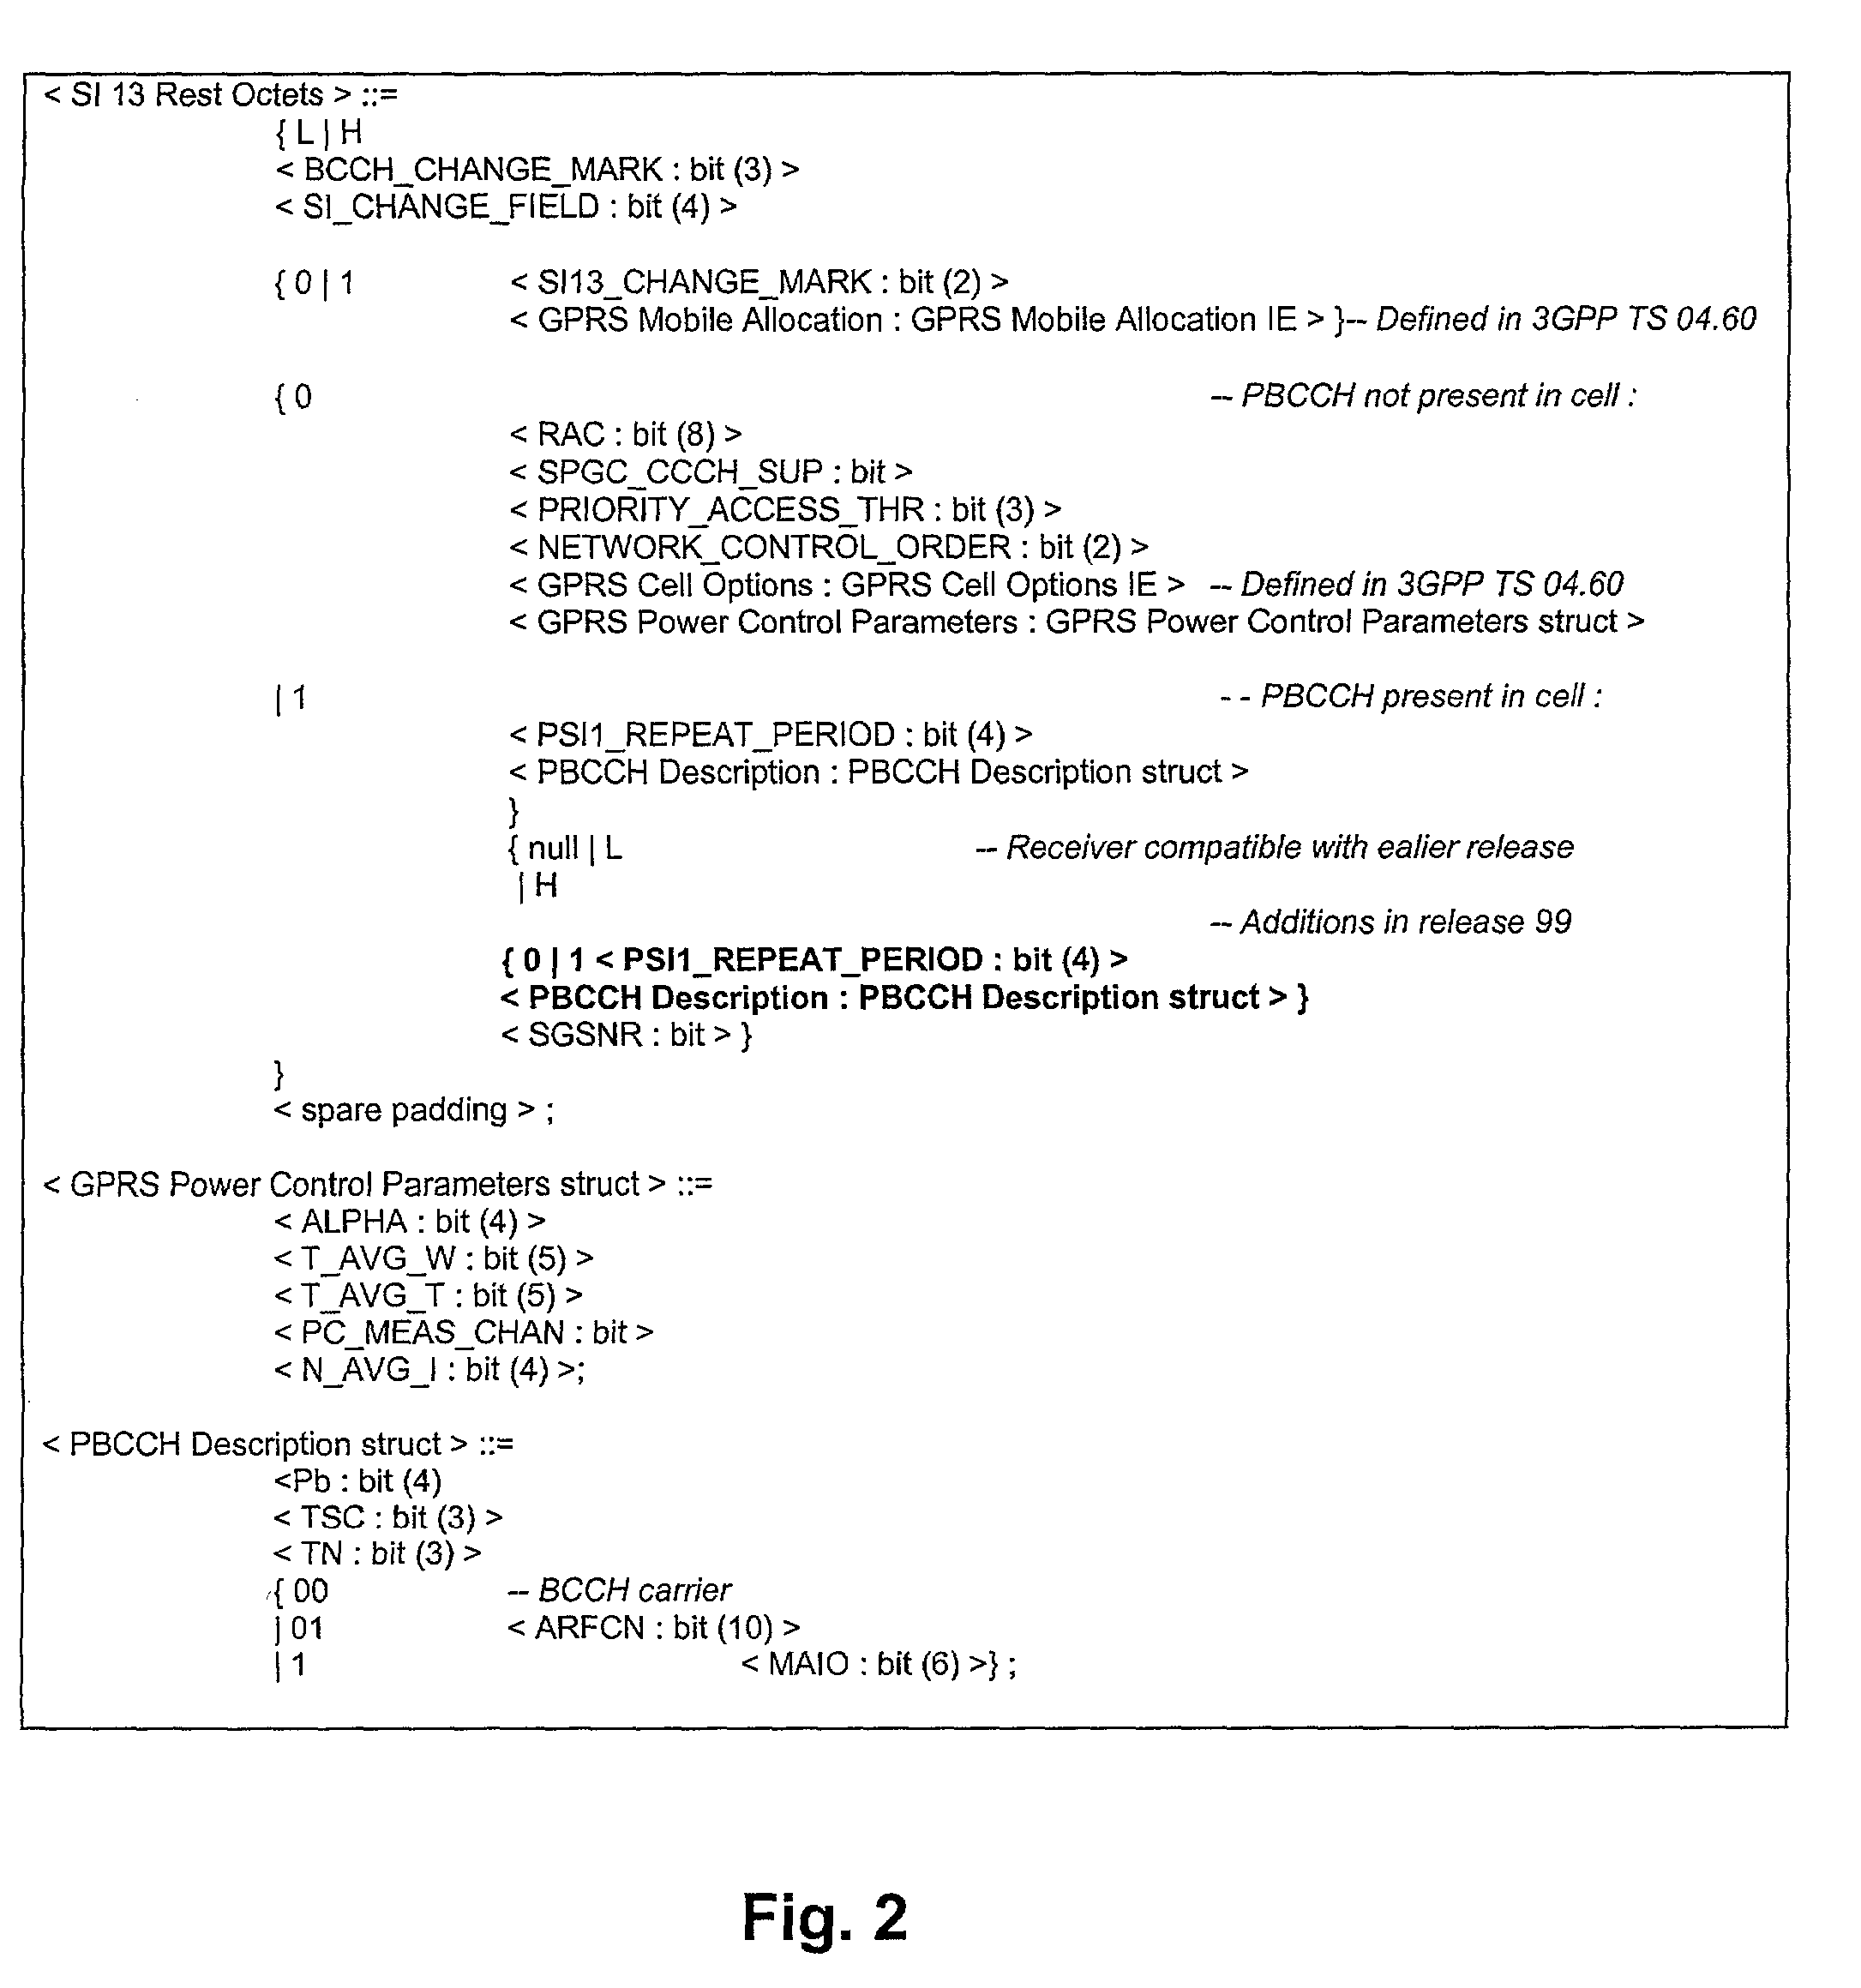 Transmitting connection set-up parameters in packet data network